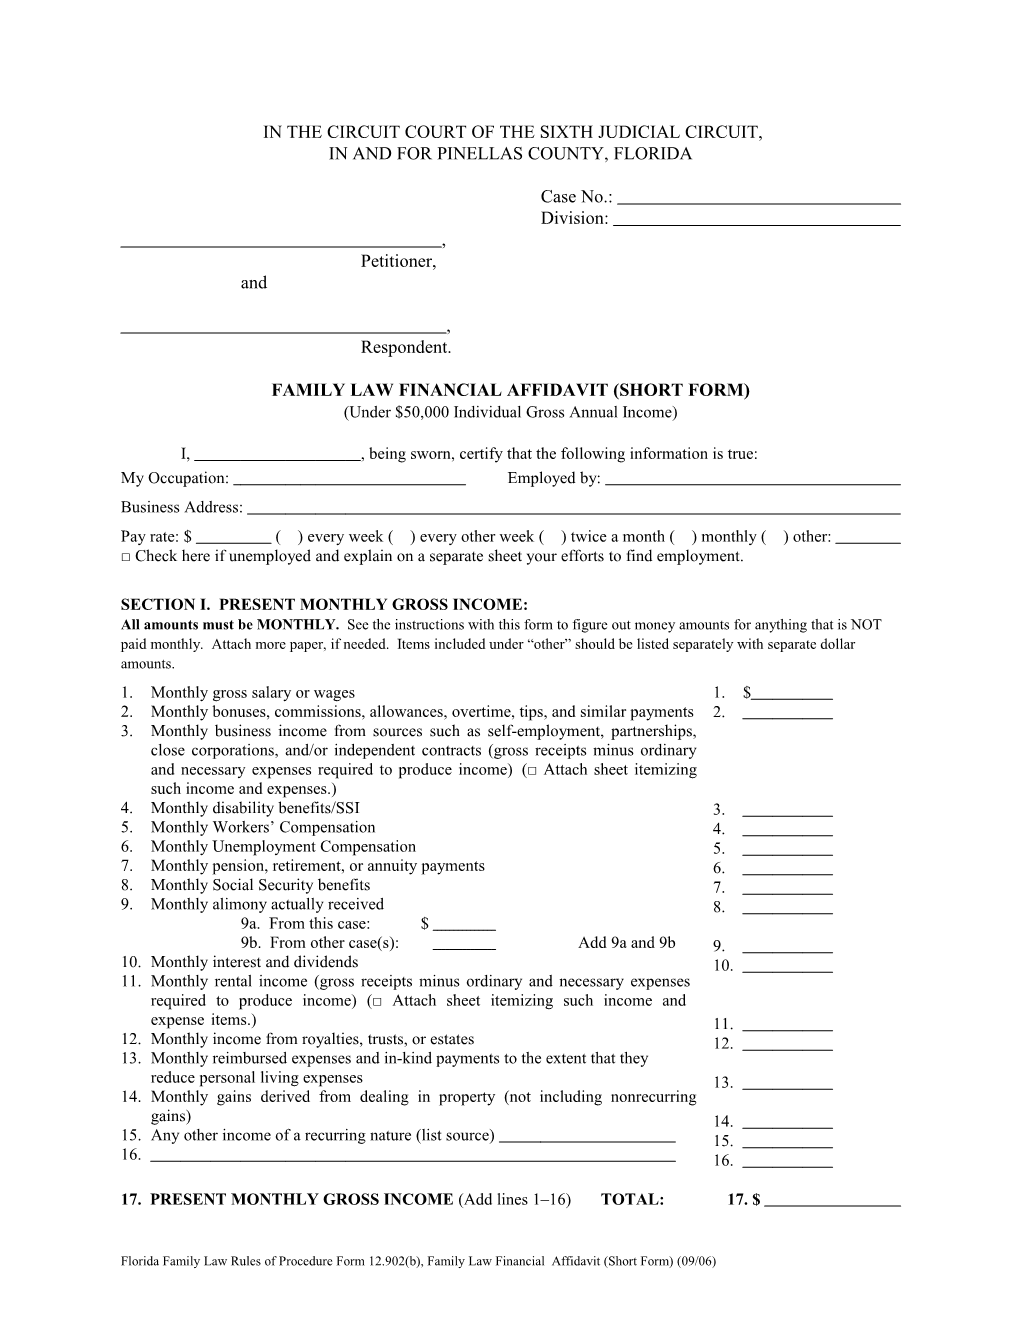 Instructions for Florida Family Law Rules of Procedure Form 12